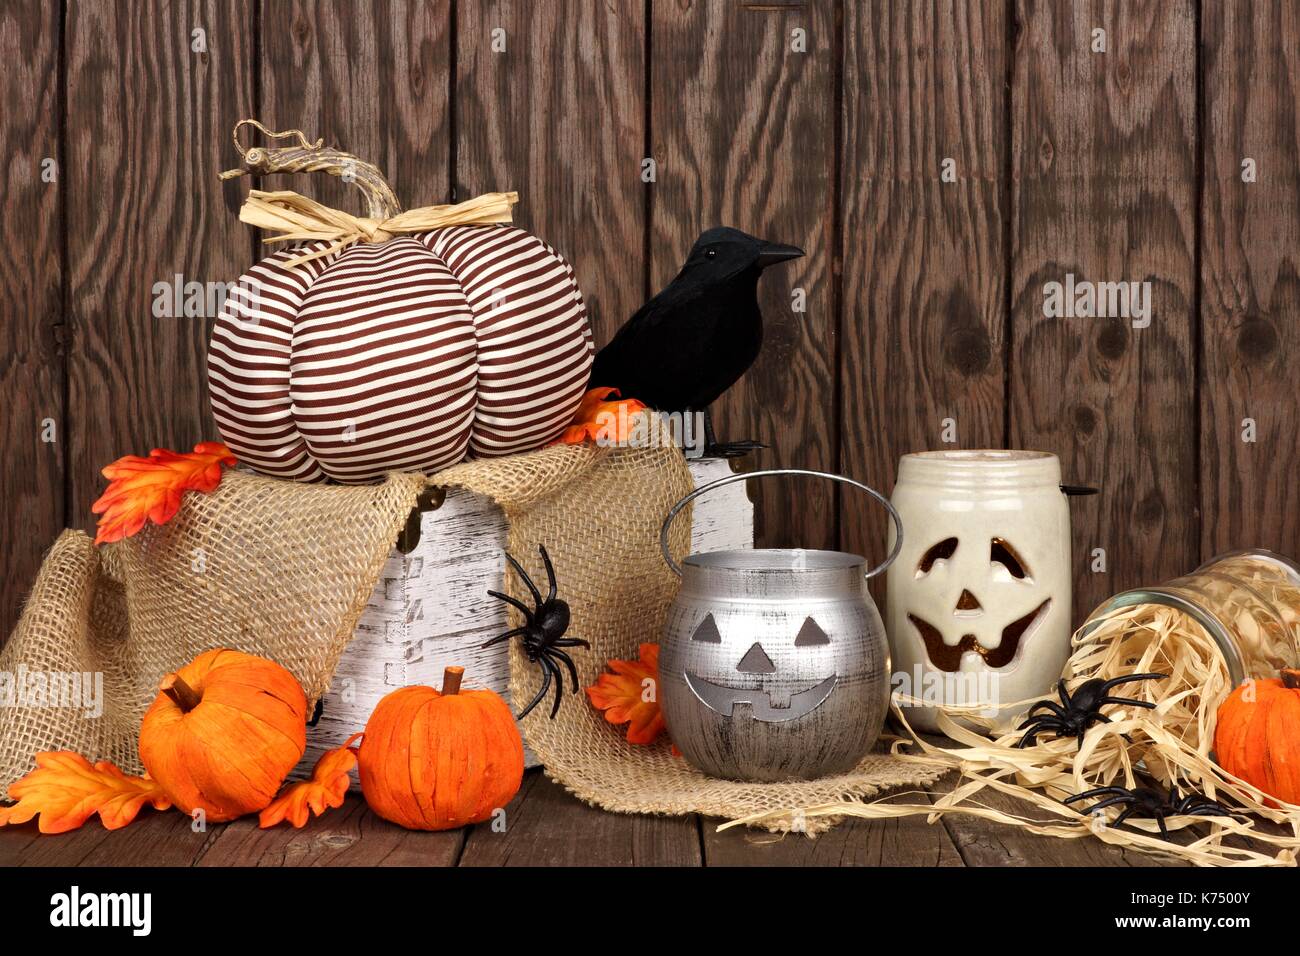 Rustic shabby chic Halloween decor against an aged wood background Stock Photo